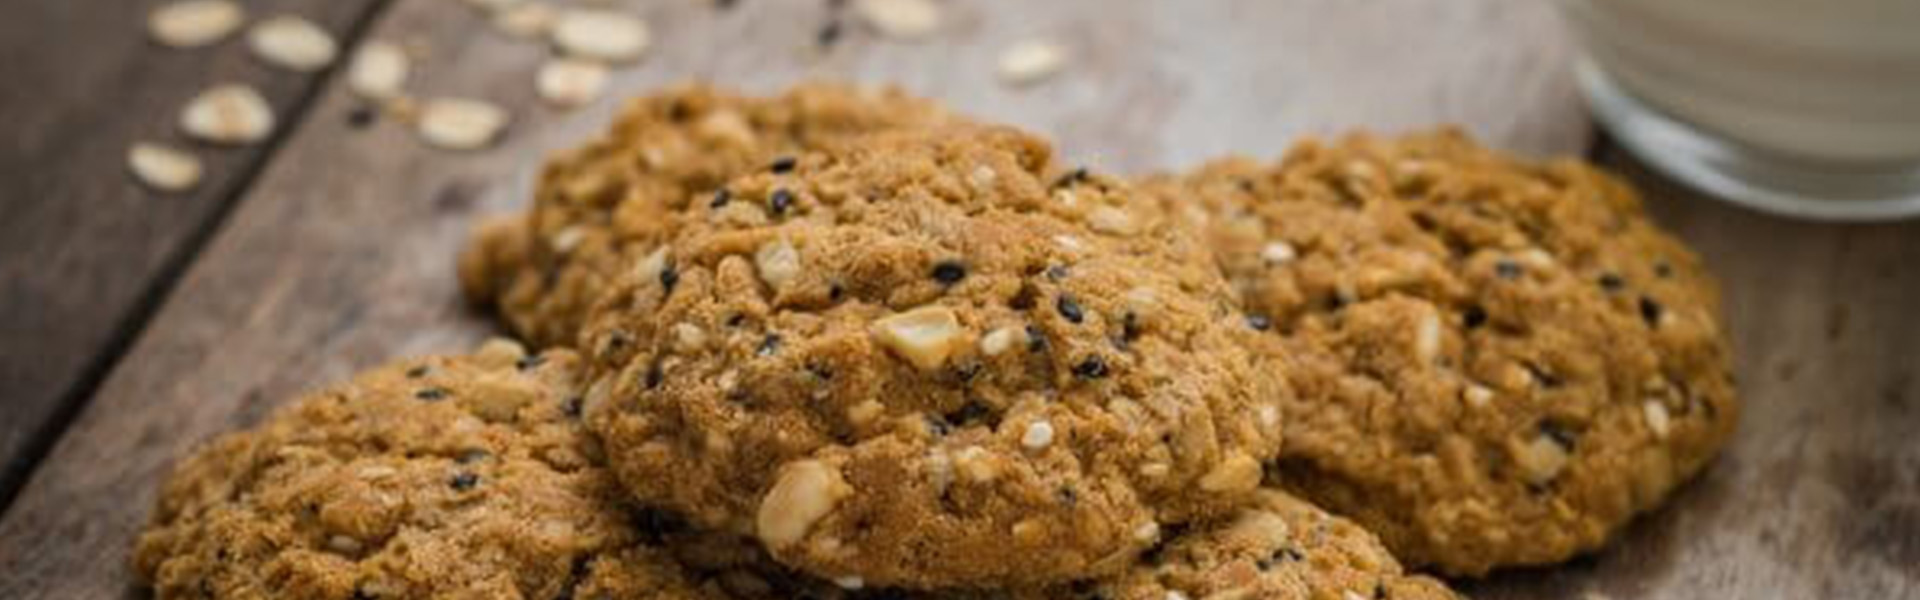 A makeover story: Breakfast Cereal to Dessert: Oatmeal Cookie